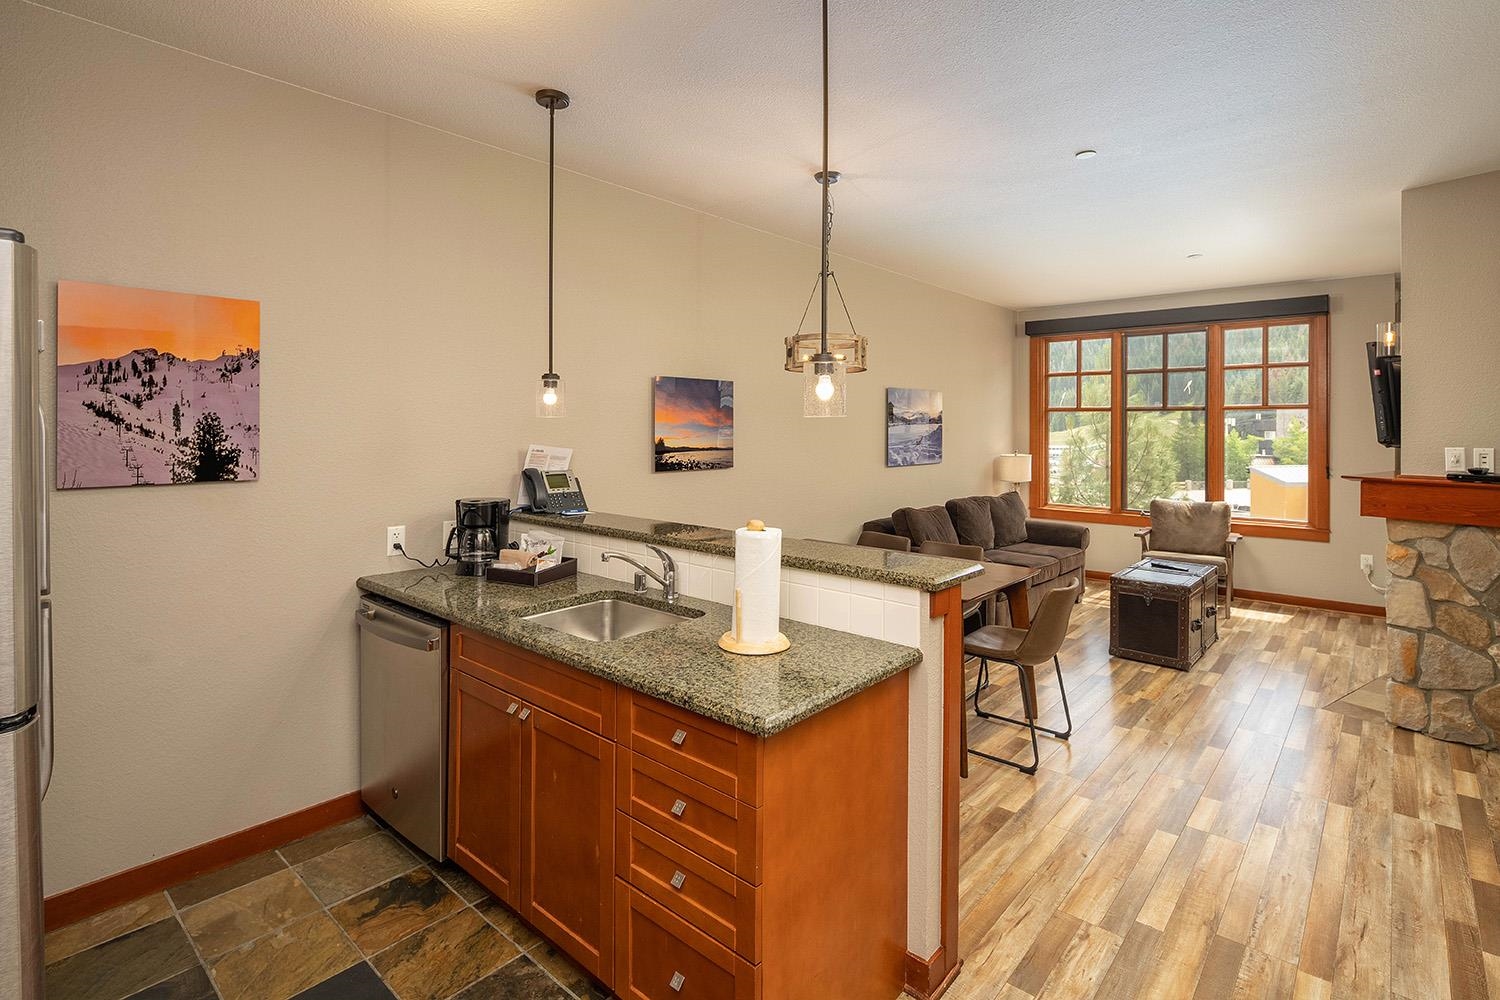 a view of kitchen island with stainless steel appliances granite countertop sink stove and wooden floor